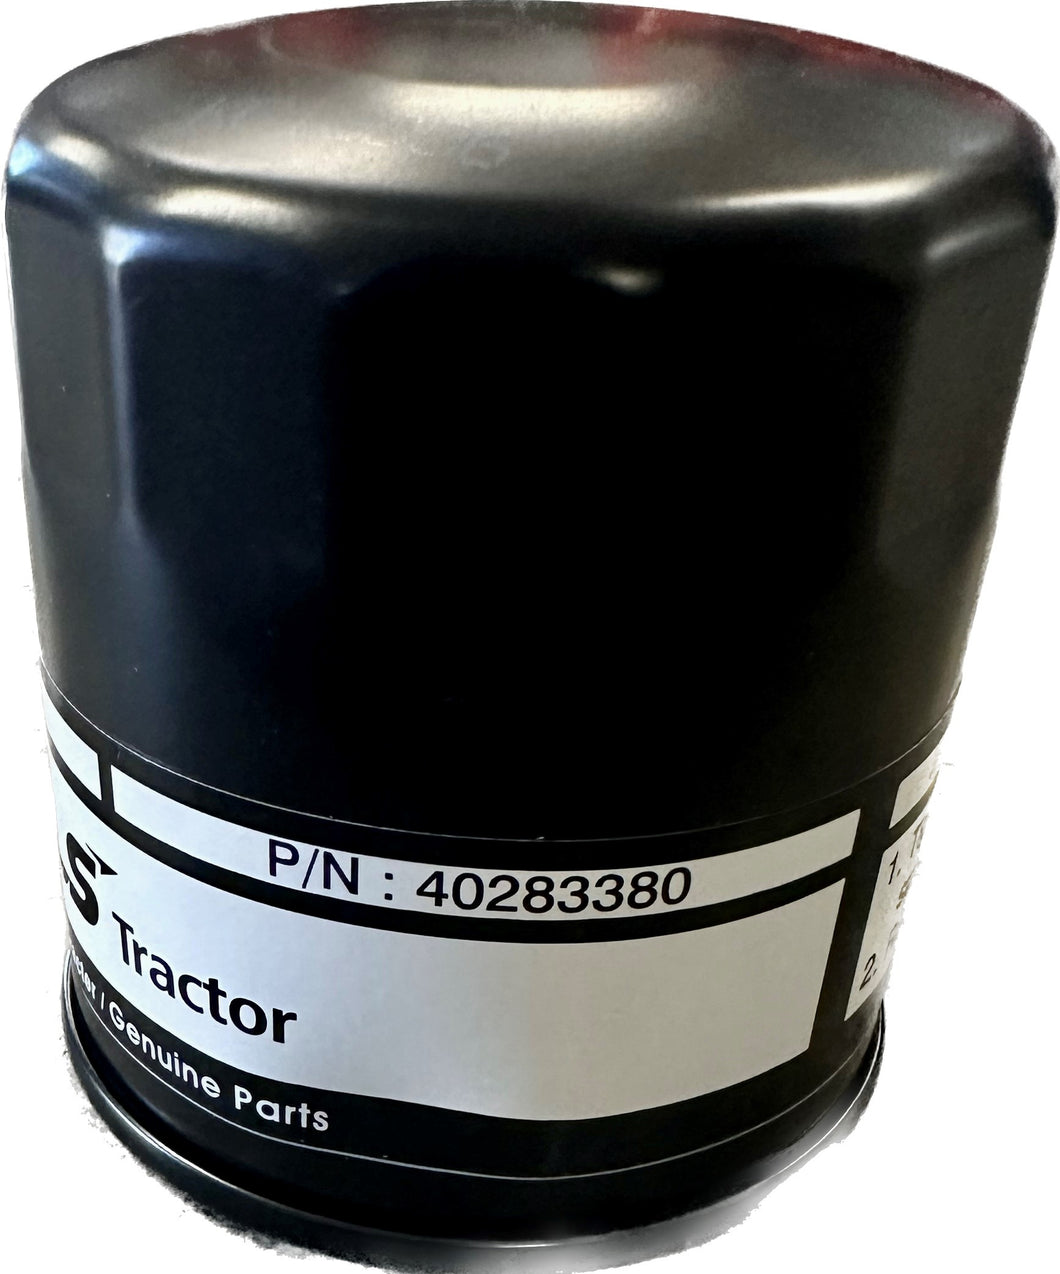 LS Tractor Oil Filter ISM 40283380